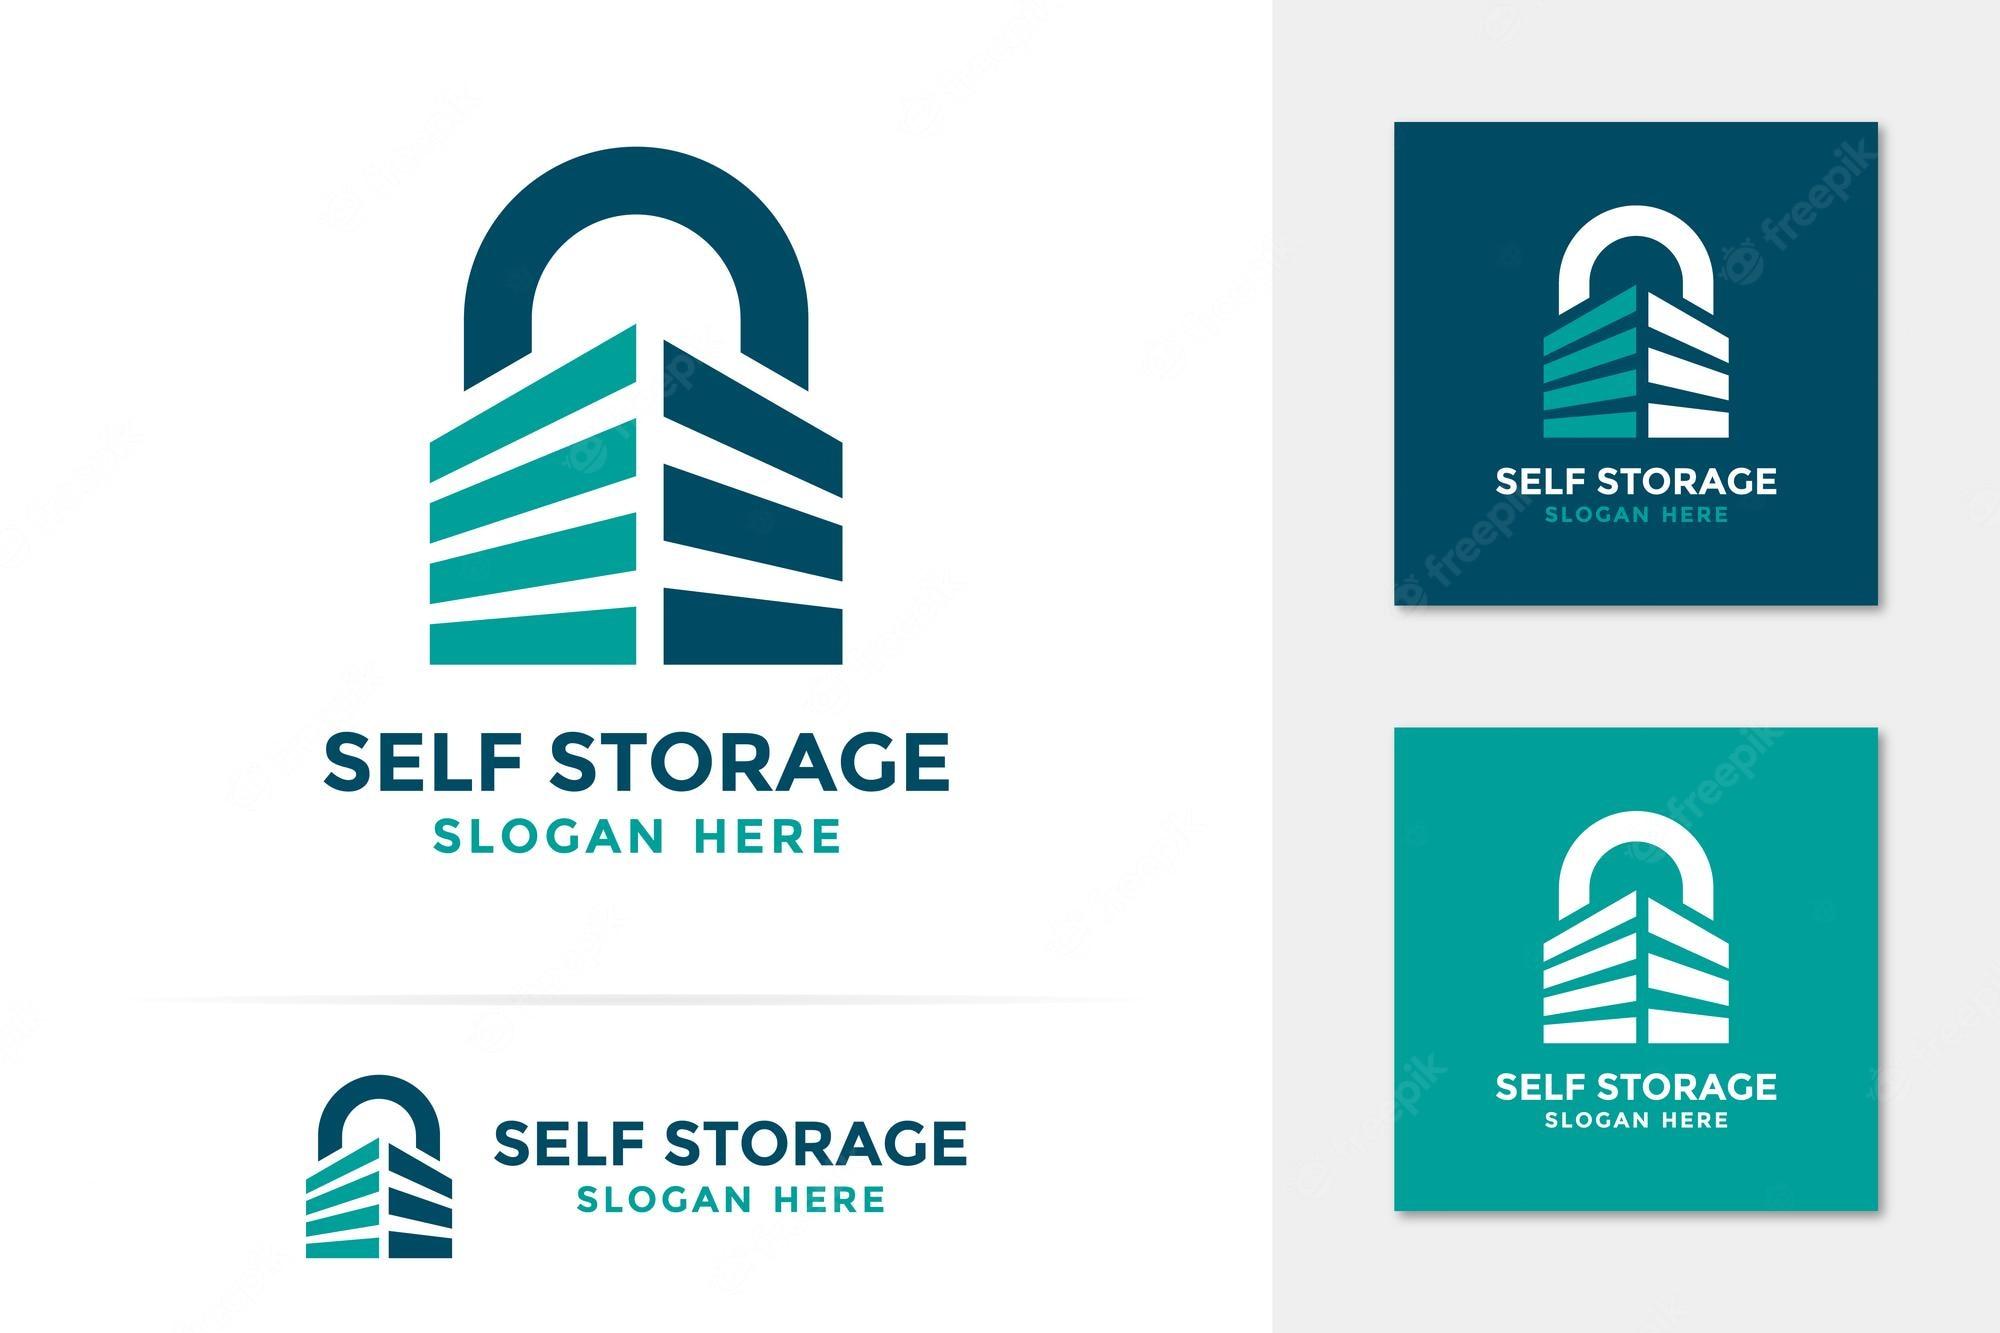 5 Self Storage Marketing Tips and Tricks for 2022